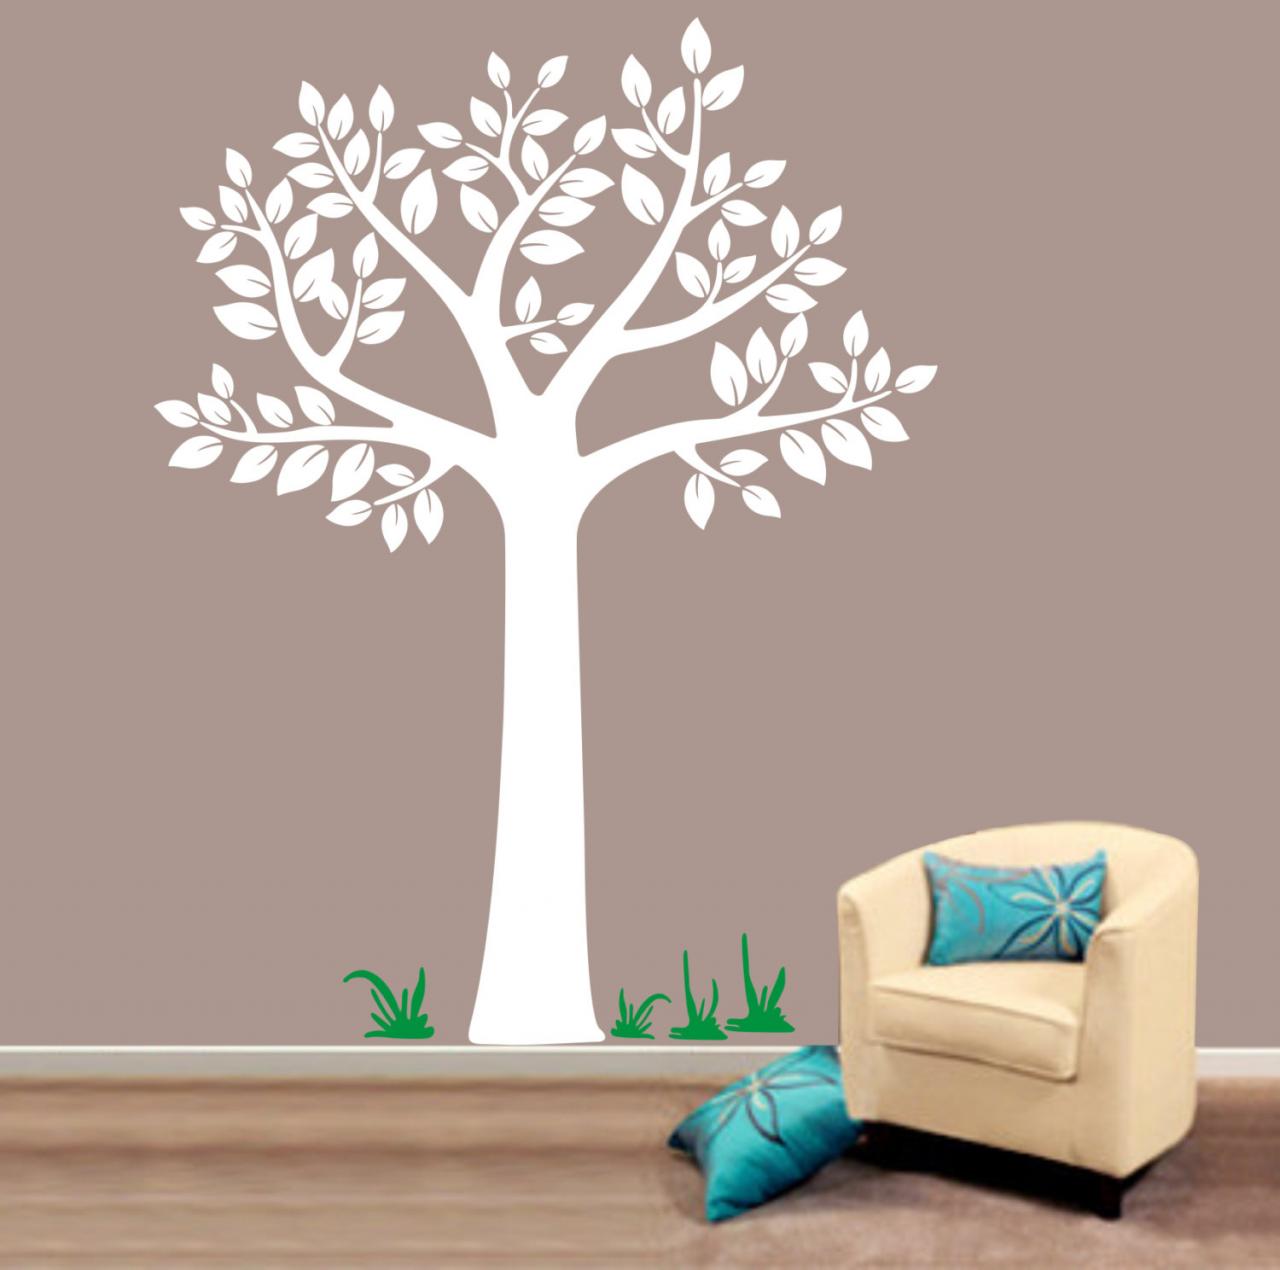 Vinyl Wall Decal Simple Single Tree With Grass Grasses Leaf Leaves Home House Art Wall Decals Wall Sticker Stickers Baby Room Kid R596